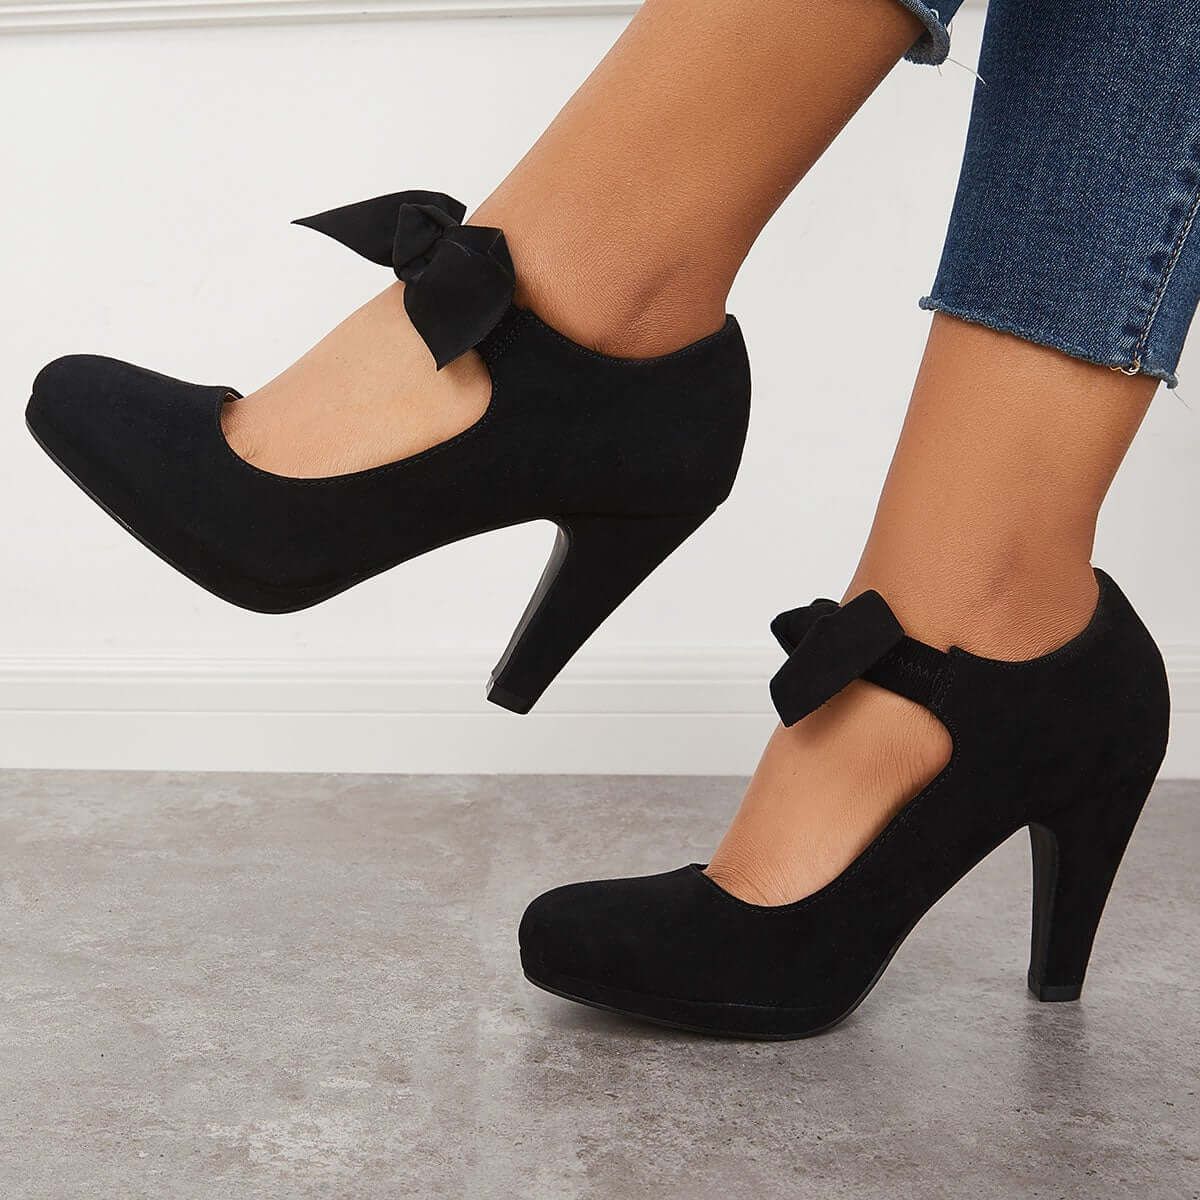 Veooy Thick Heel Pumps Bowknot Round Toe Ankle Strap Heels